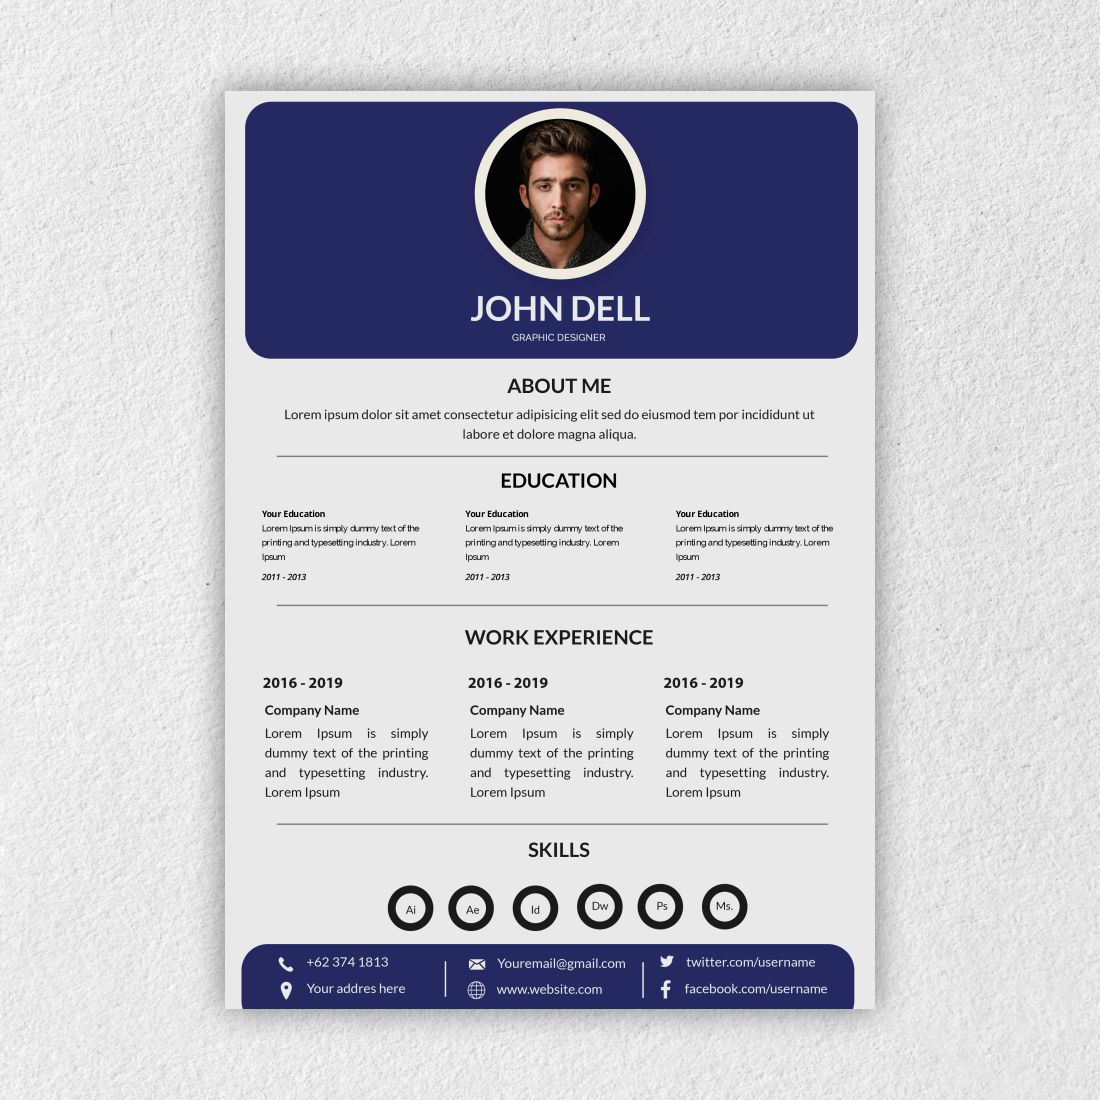 CV/Resume Design For Graphic Design and only for one page.